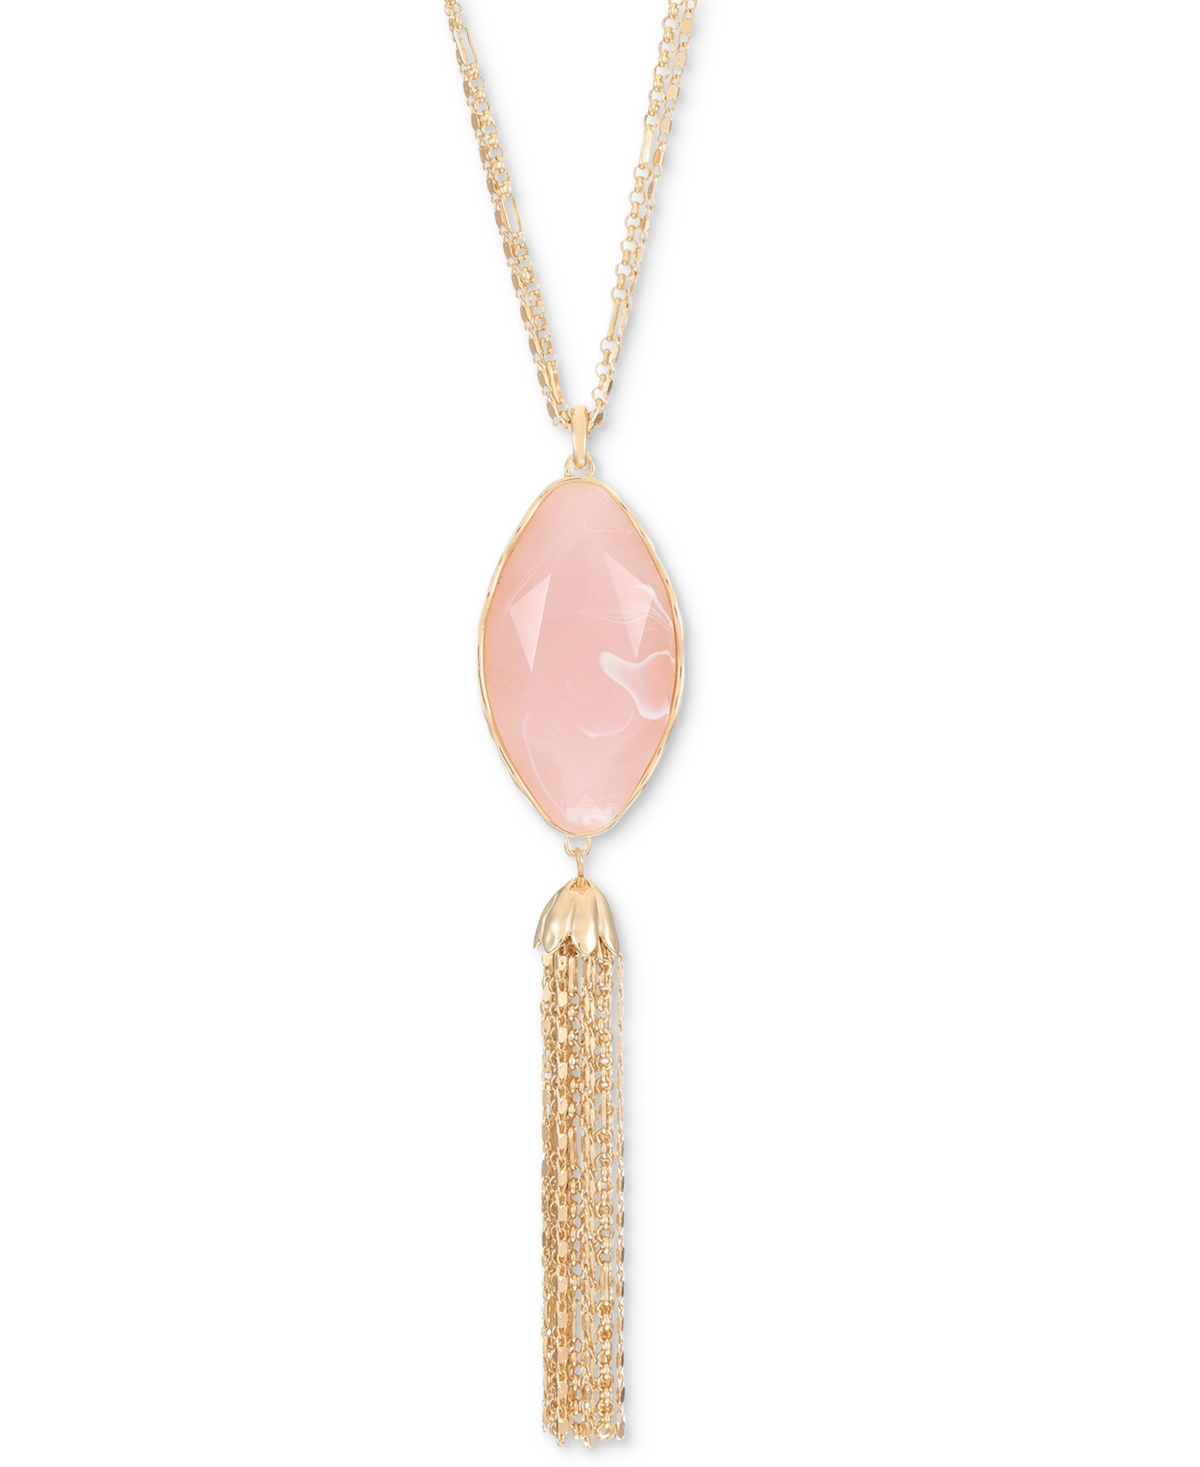 Stone & Chain Tassel Long Lariat Necklace, 32" + 3" extender, Created for Macy's - Dusty Pink